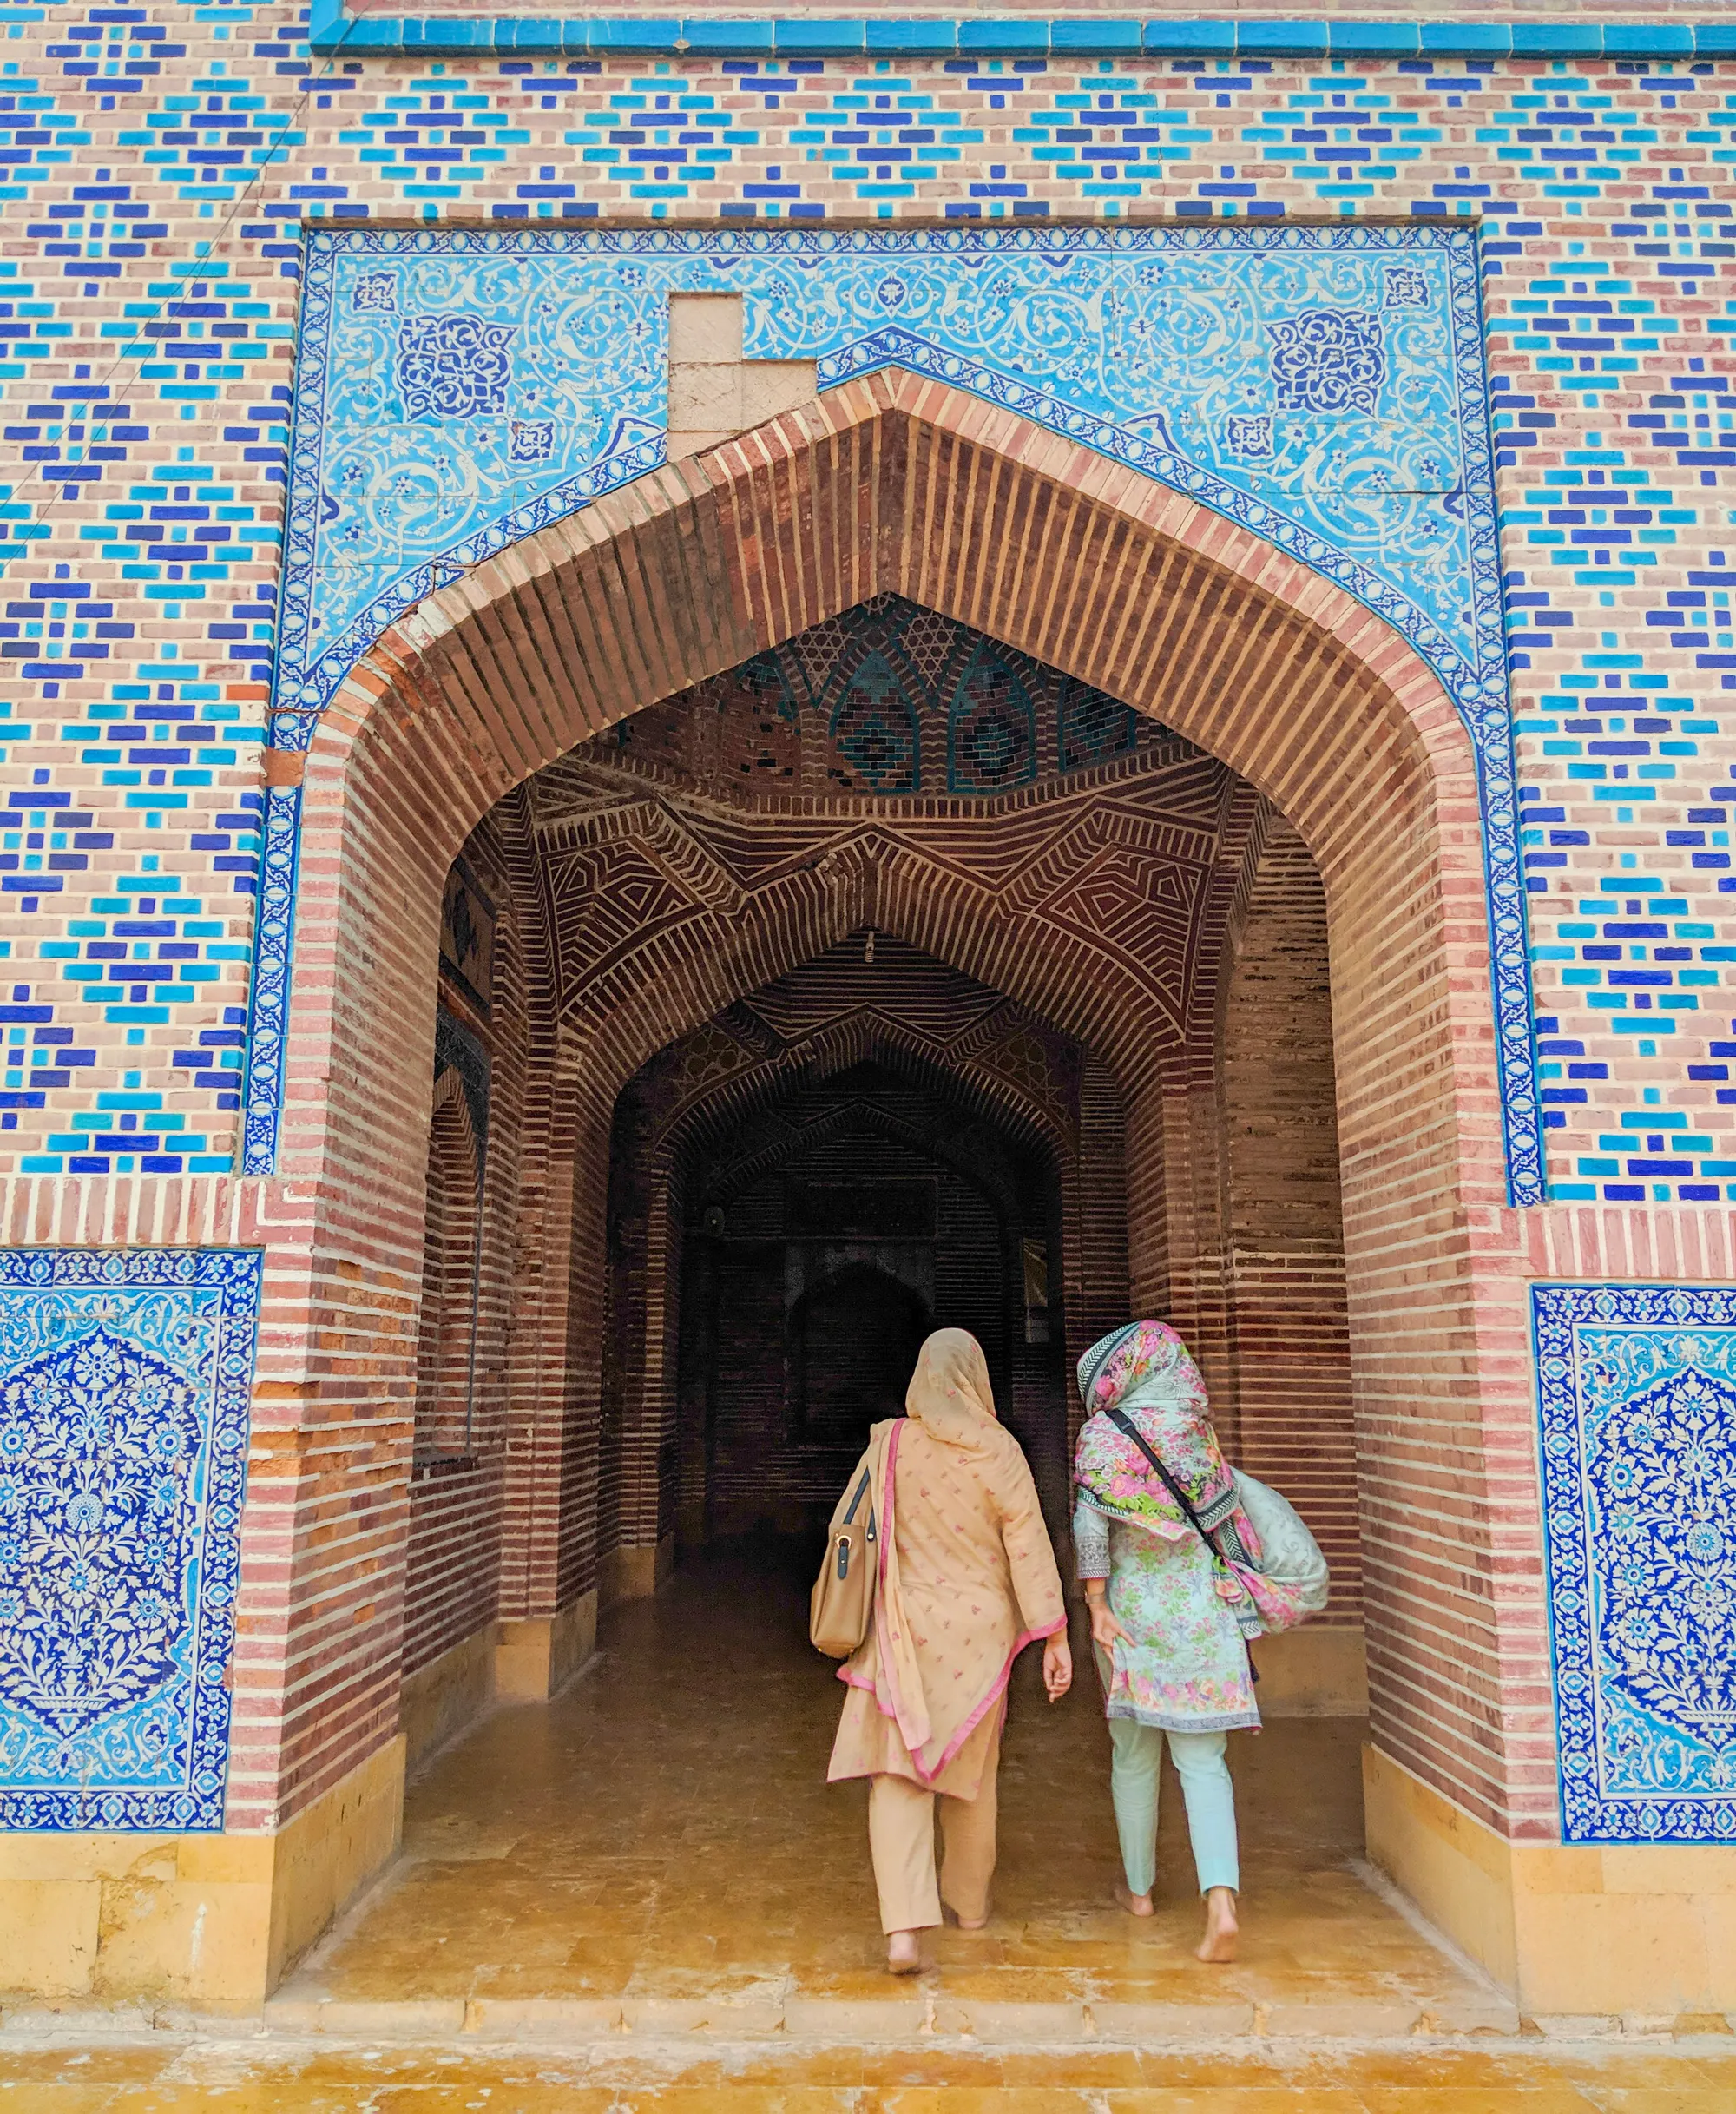 A photograph of two women walking through an arched entrance composed of brick and surrounded by tiles of blue, turquoise, gold, and white set in geometric and floral patterns.